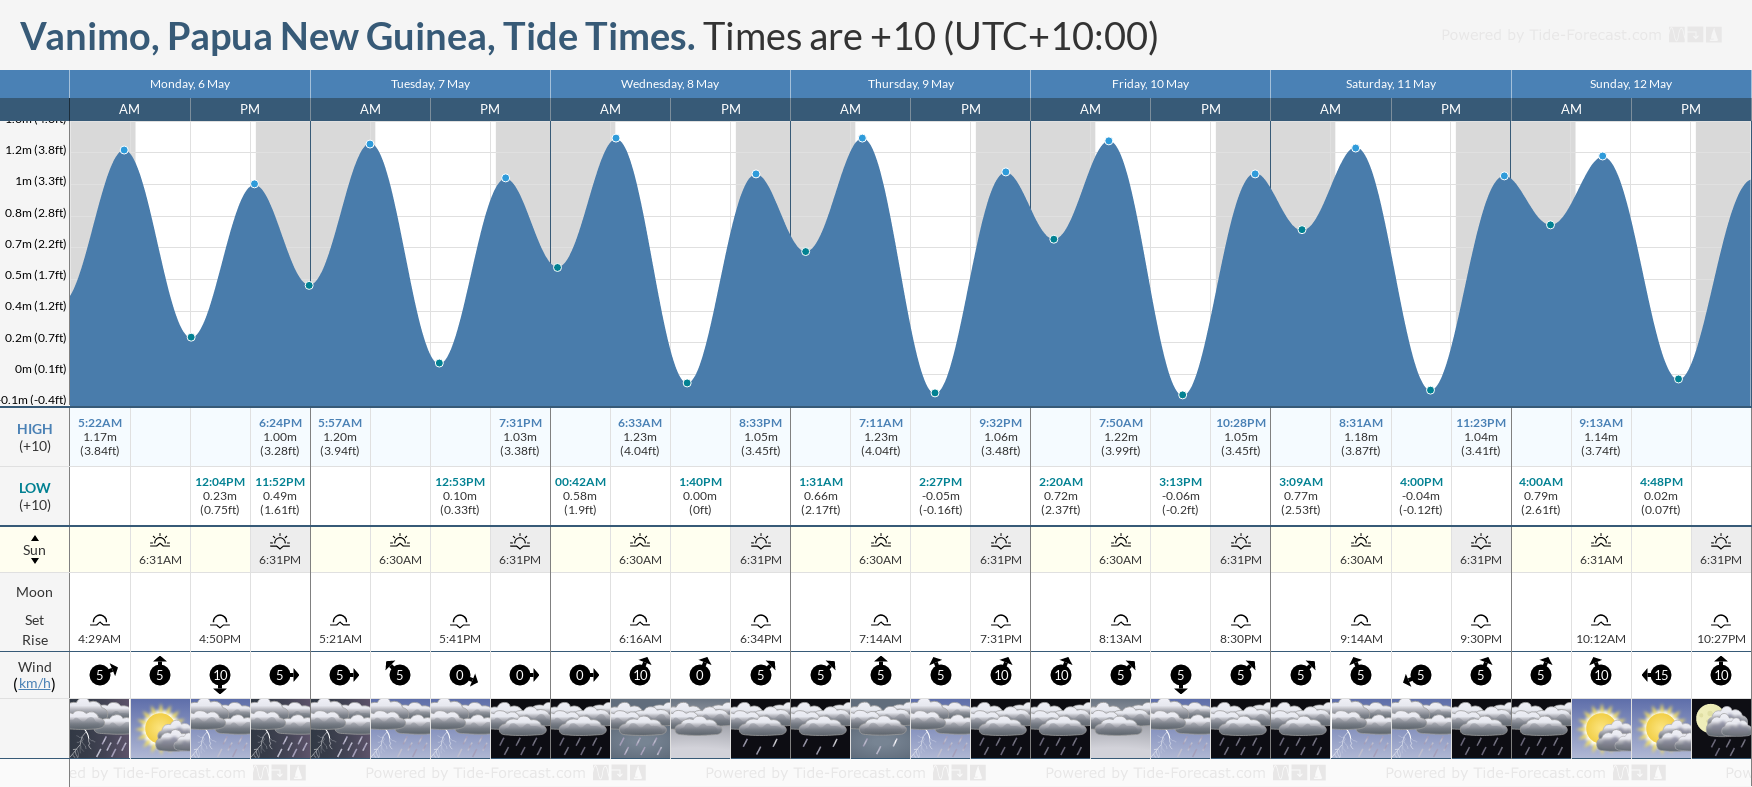 Vanimo, Papua New Guinea Tide Chart including high and low tide tide times for the next 7 days